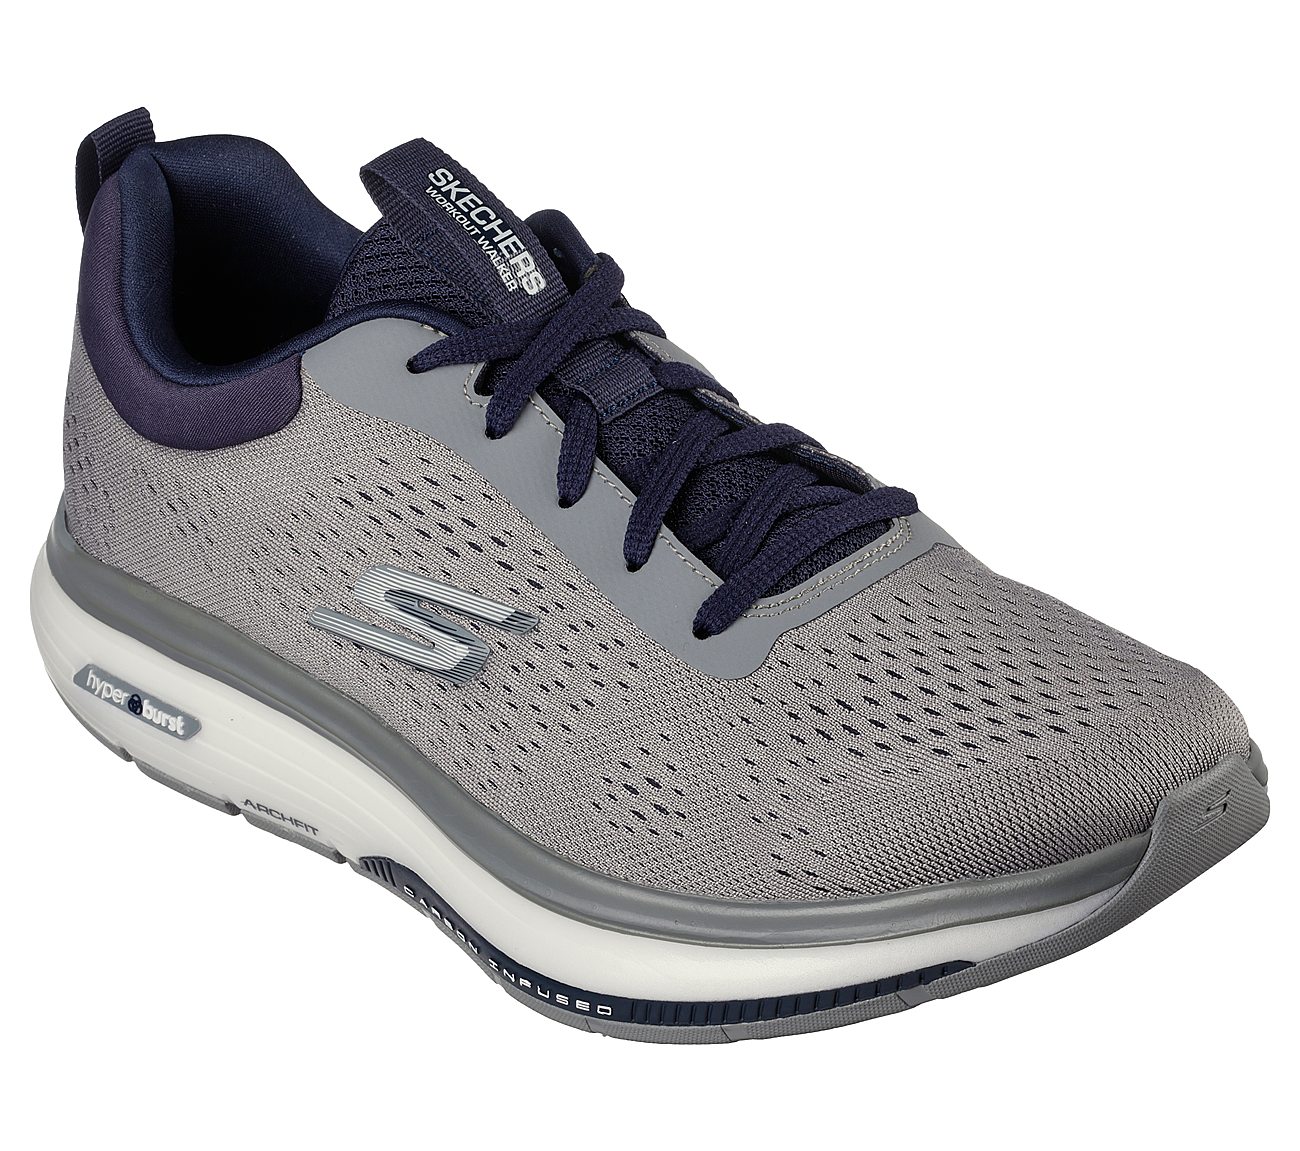 GO WALK WORKOUT WALKER-OUTPAC, GREY/NAVY Footwear Lateral View